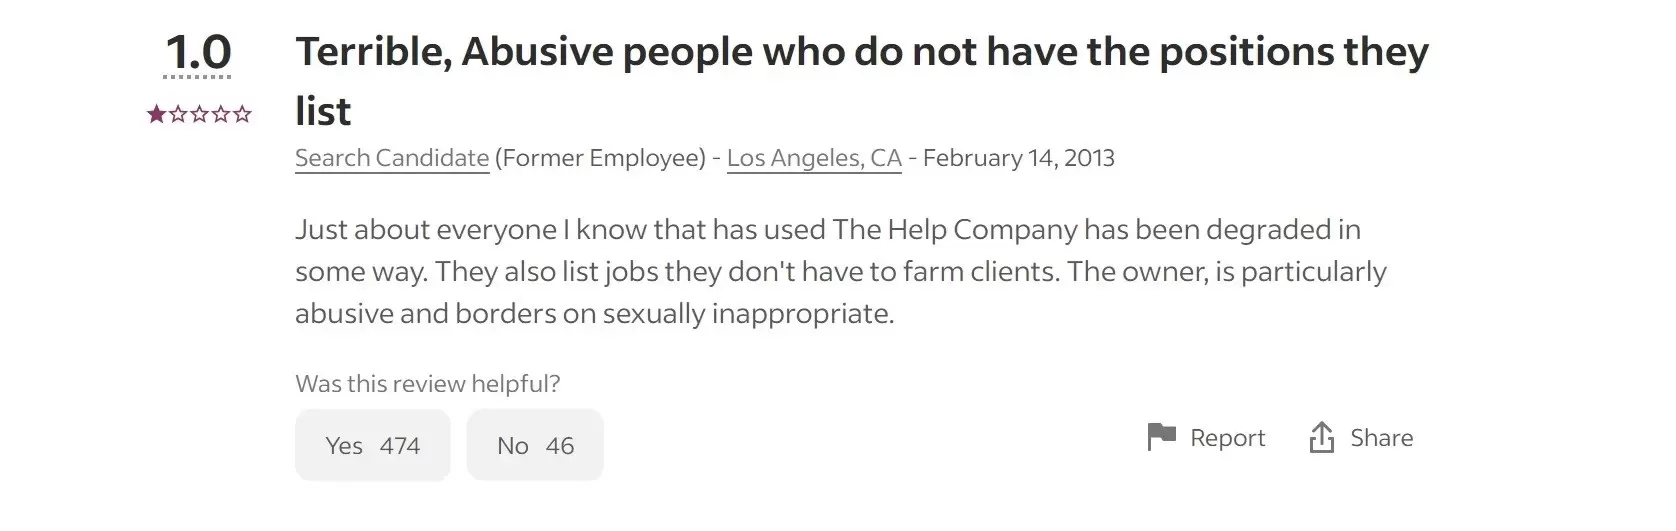 critical employee review of The Help Company